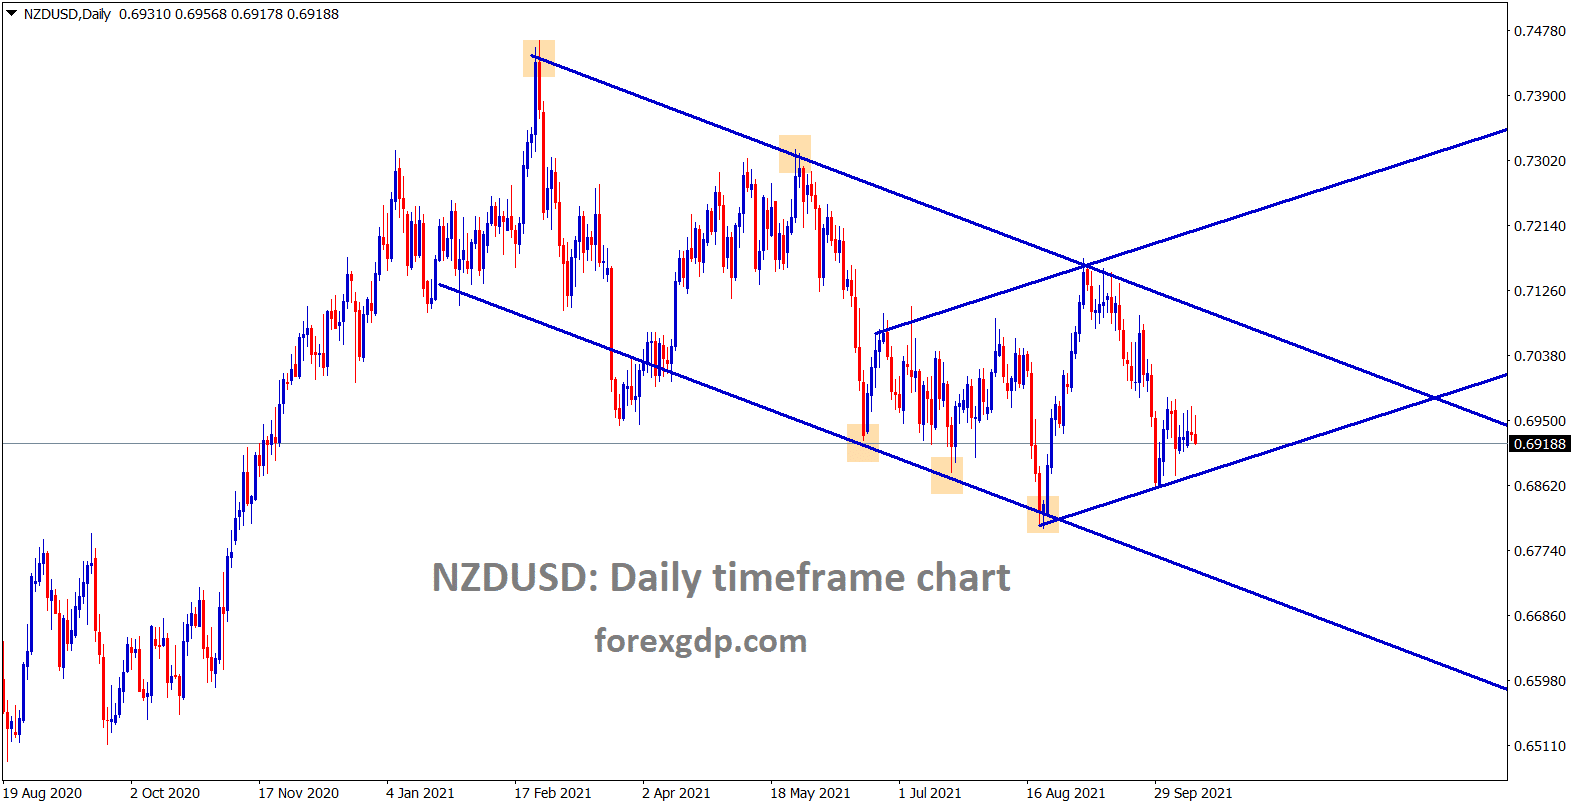 NZDUSD is consolidating at the smaller price range